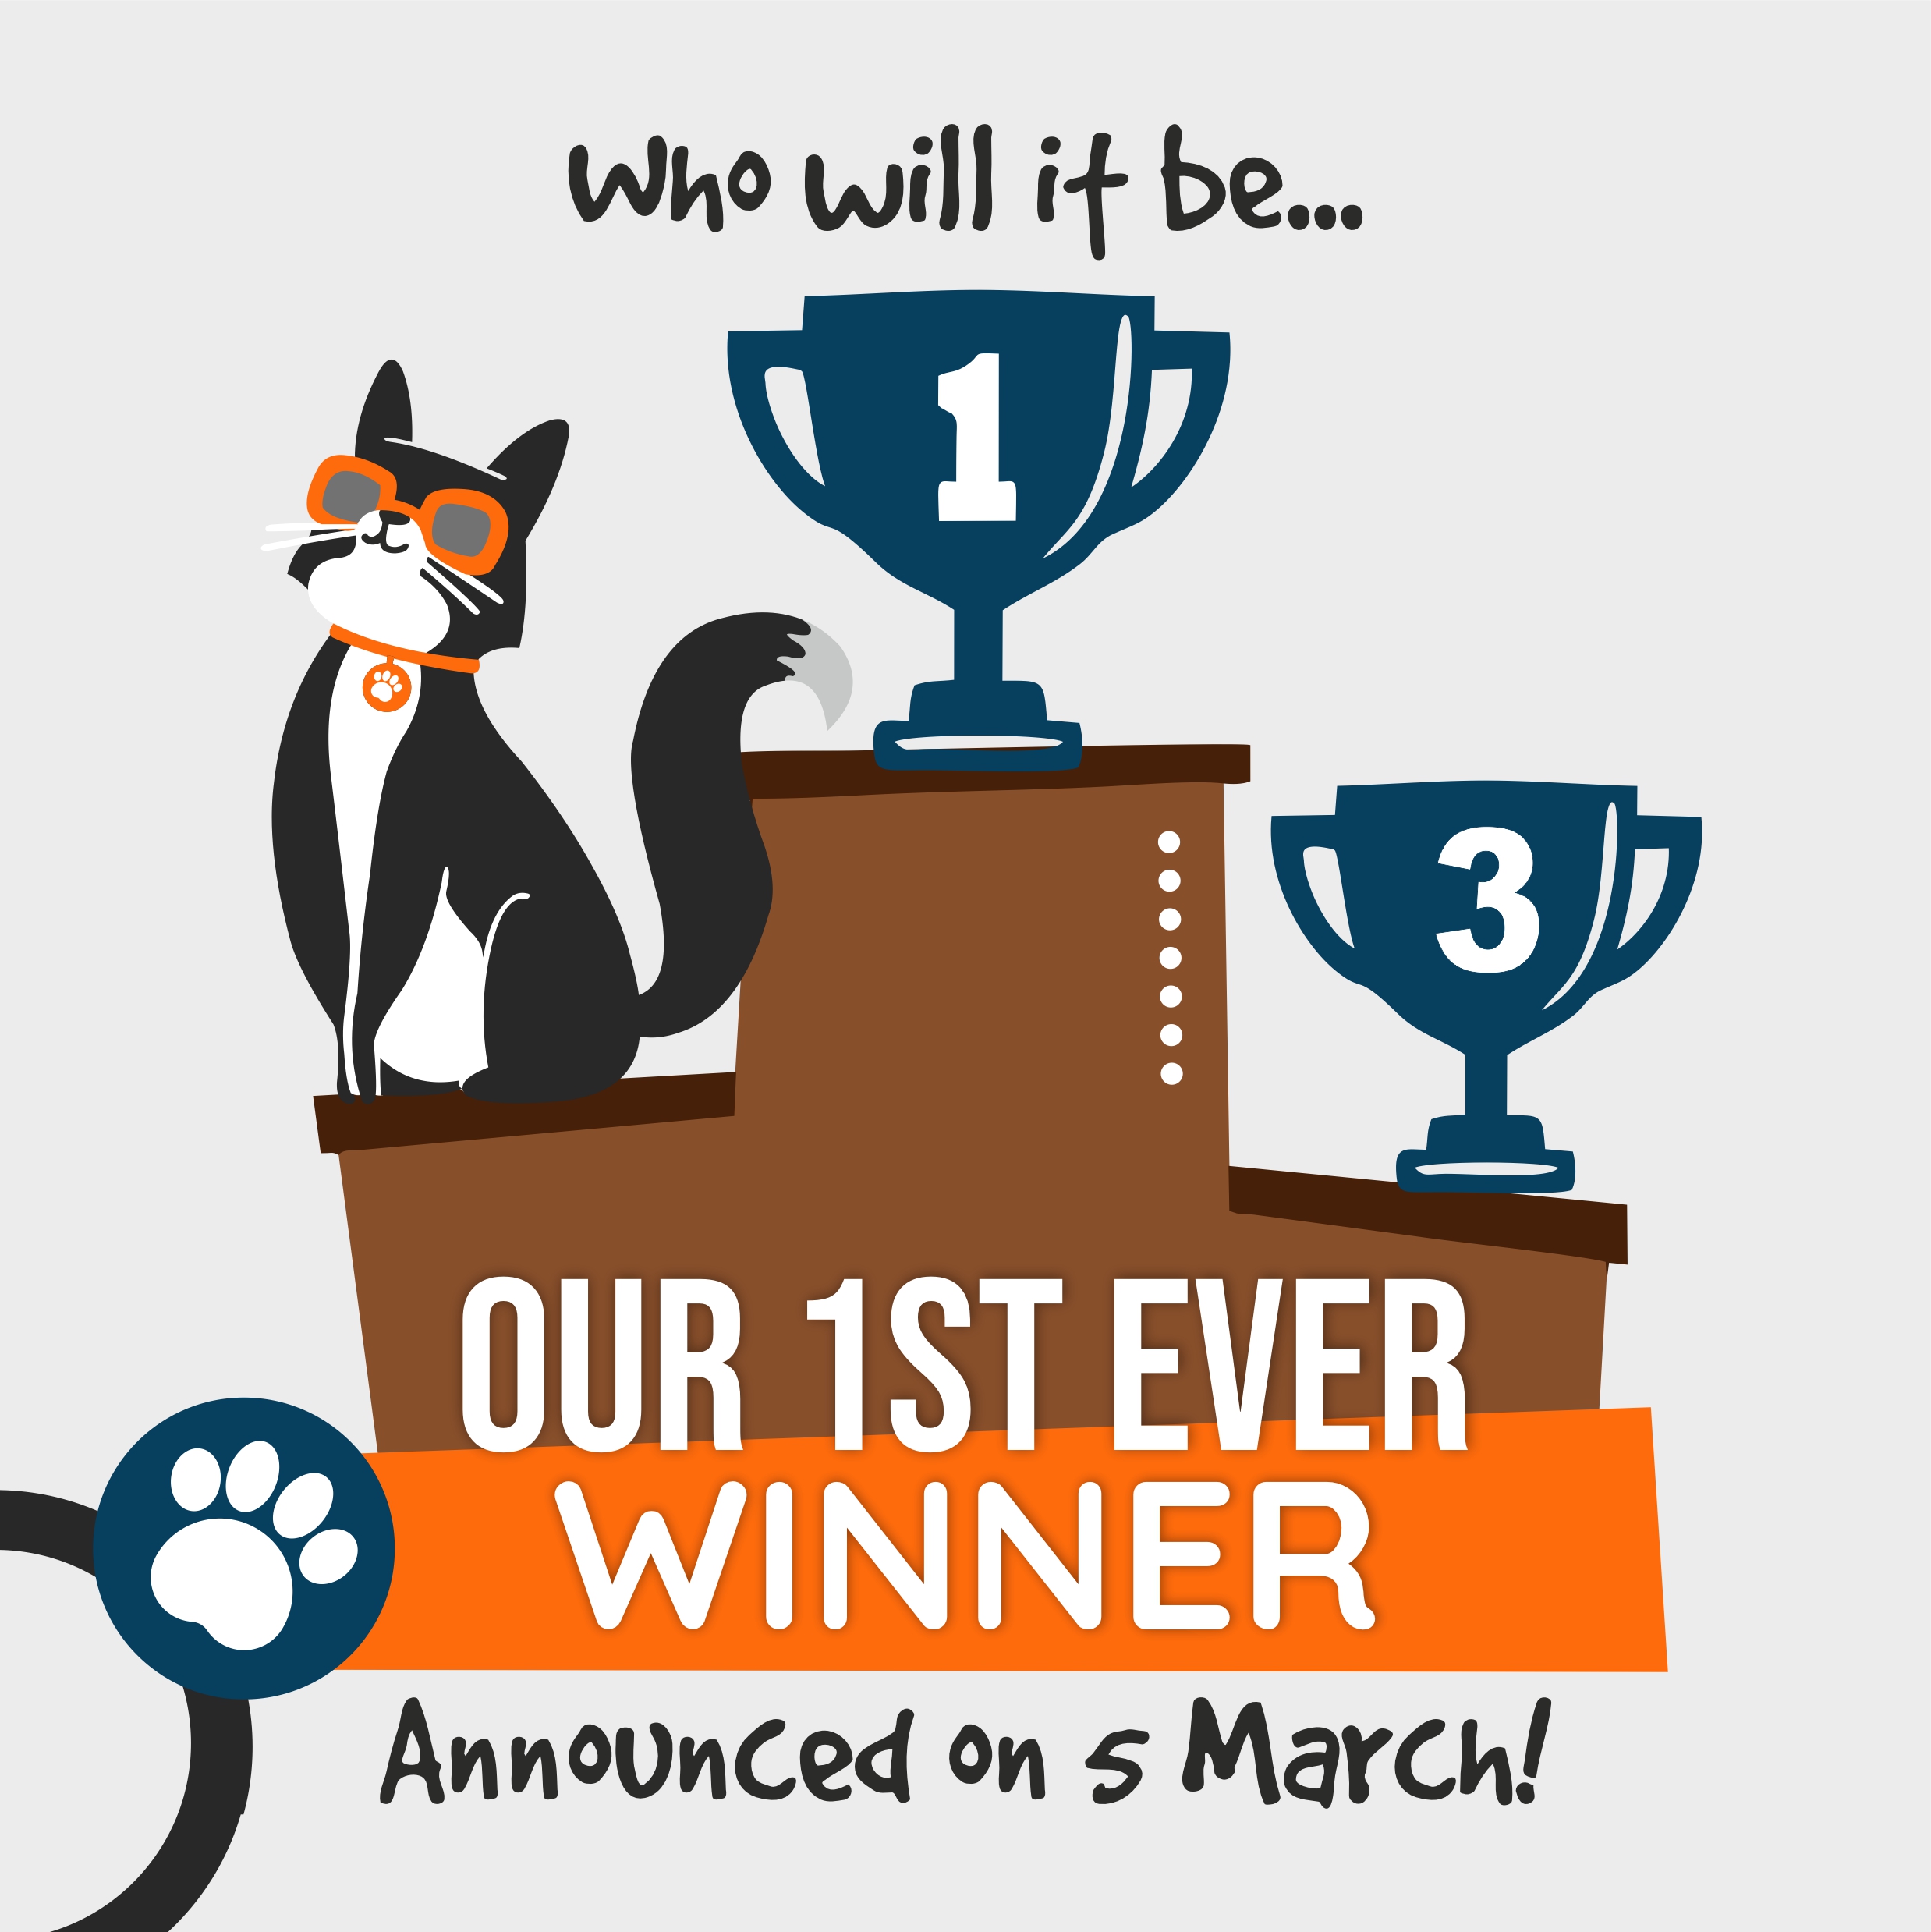 Our 1st ever winner - Announced on 5 March!